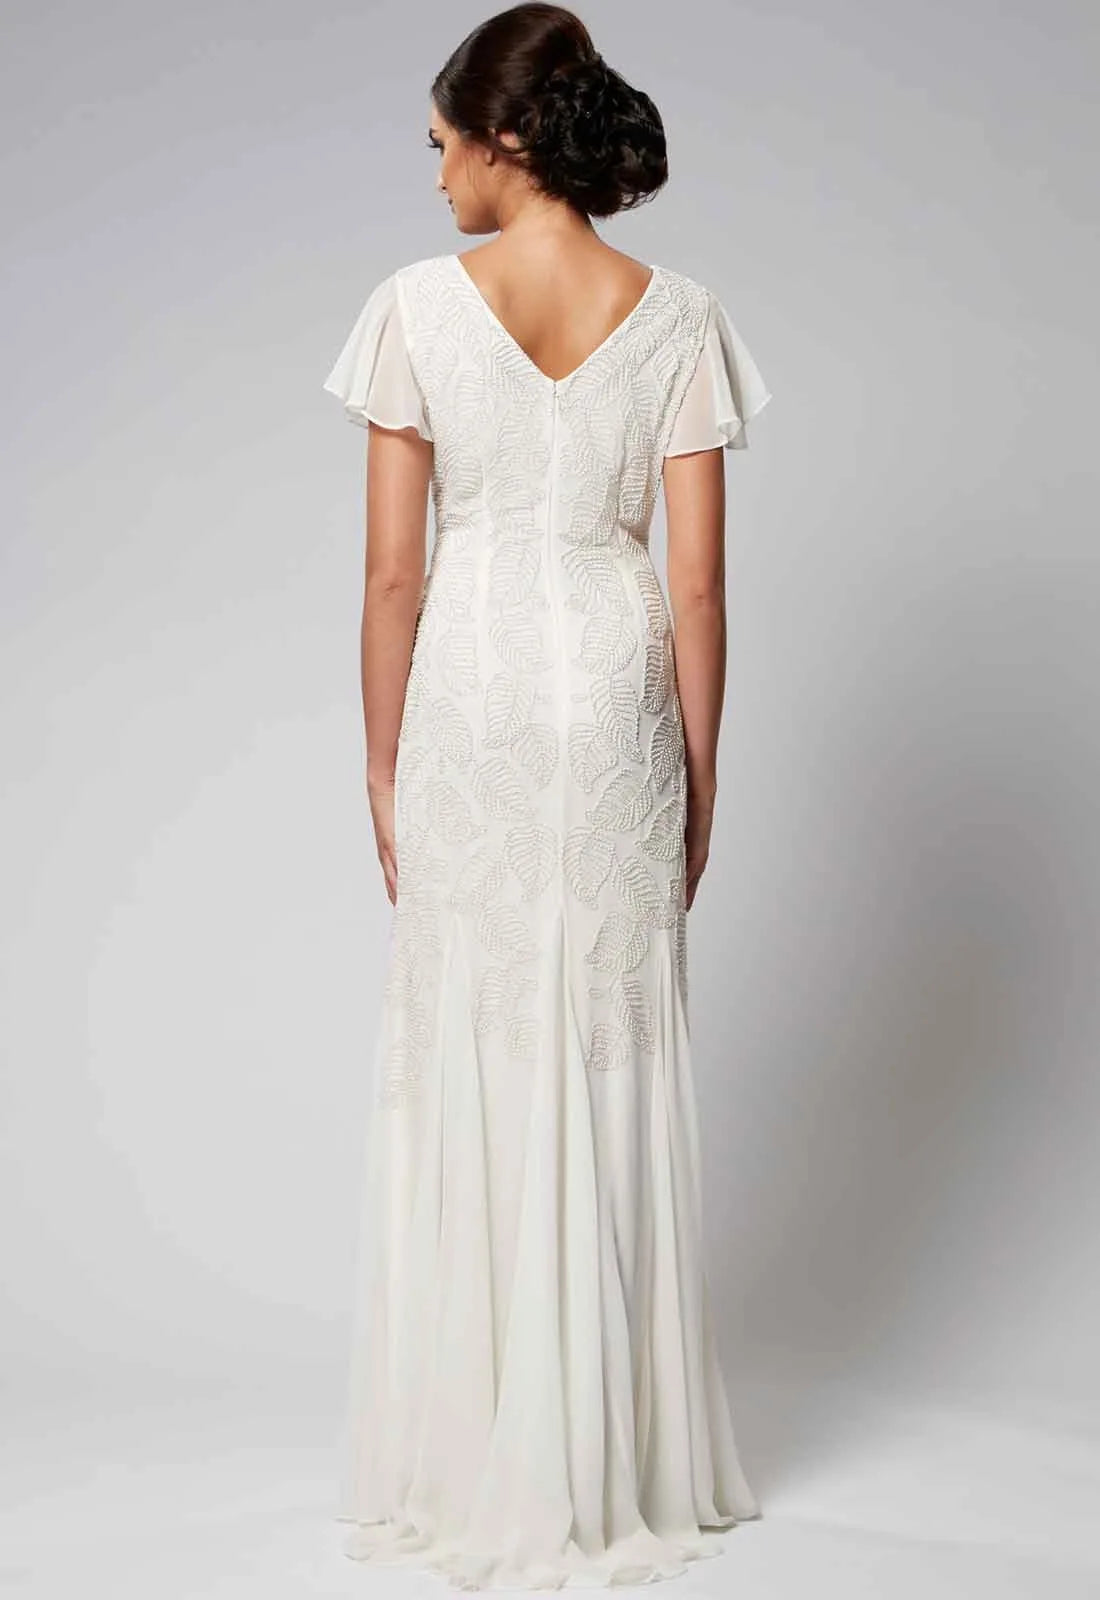 Raishma Leefy Embroidery Gown in White-19326